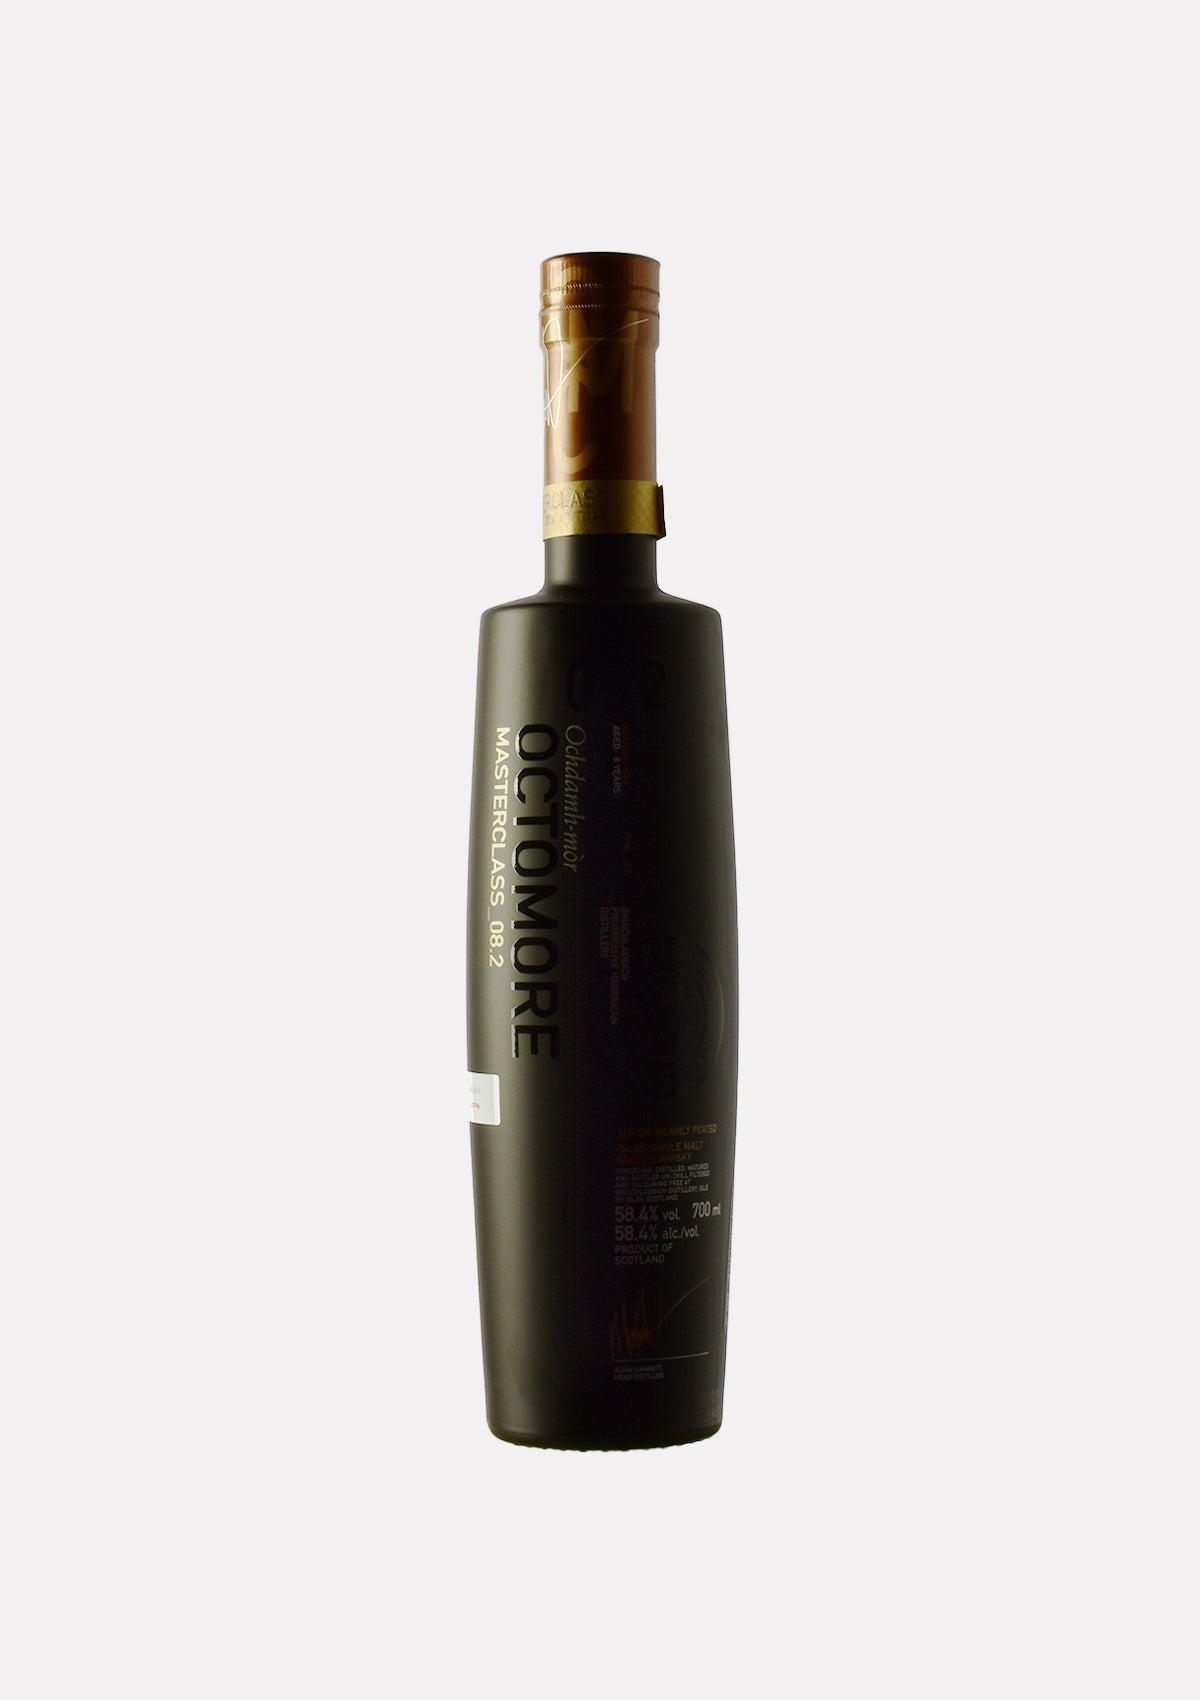 Octomore Masterclass 08.2 167 ppm